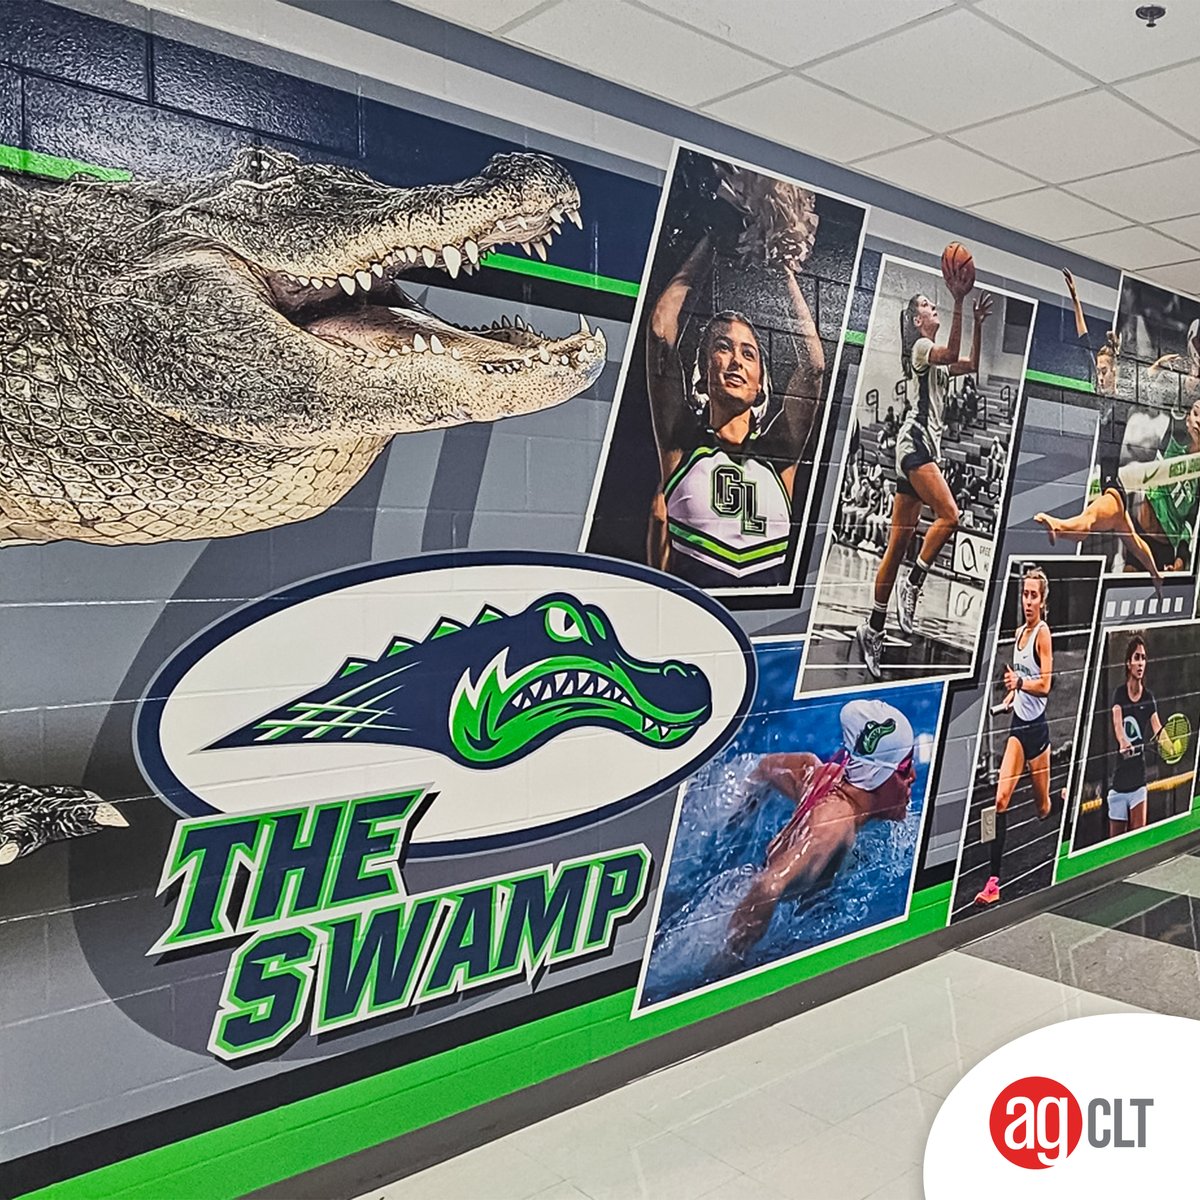 Elevate your space with vibrant wall graphics that embody your brand's colors and team spirit! 🤩
#AlphaGraphics #AlphaGraphicsCLT #CharlotteNC #PrintandMarketing #Printshop #PrintProduction #PrintingServices #SmallBusiness #MarketingCompany #MarketingStrategy #Signage